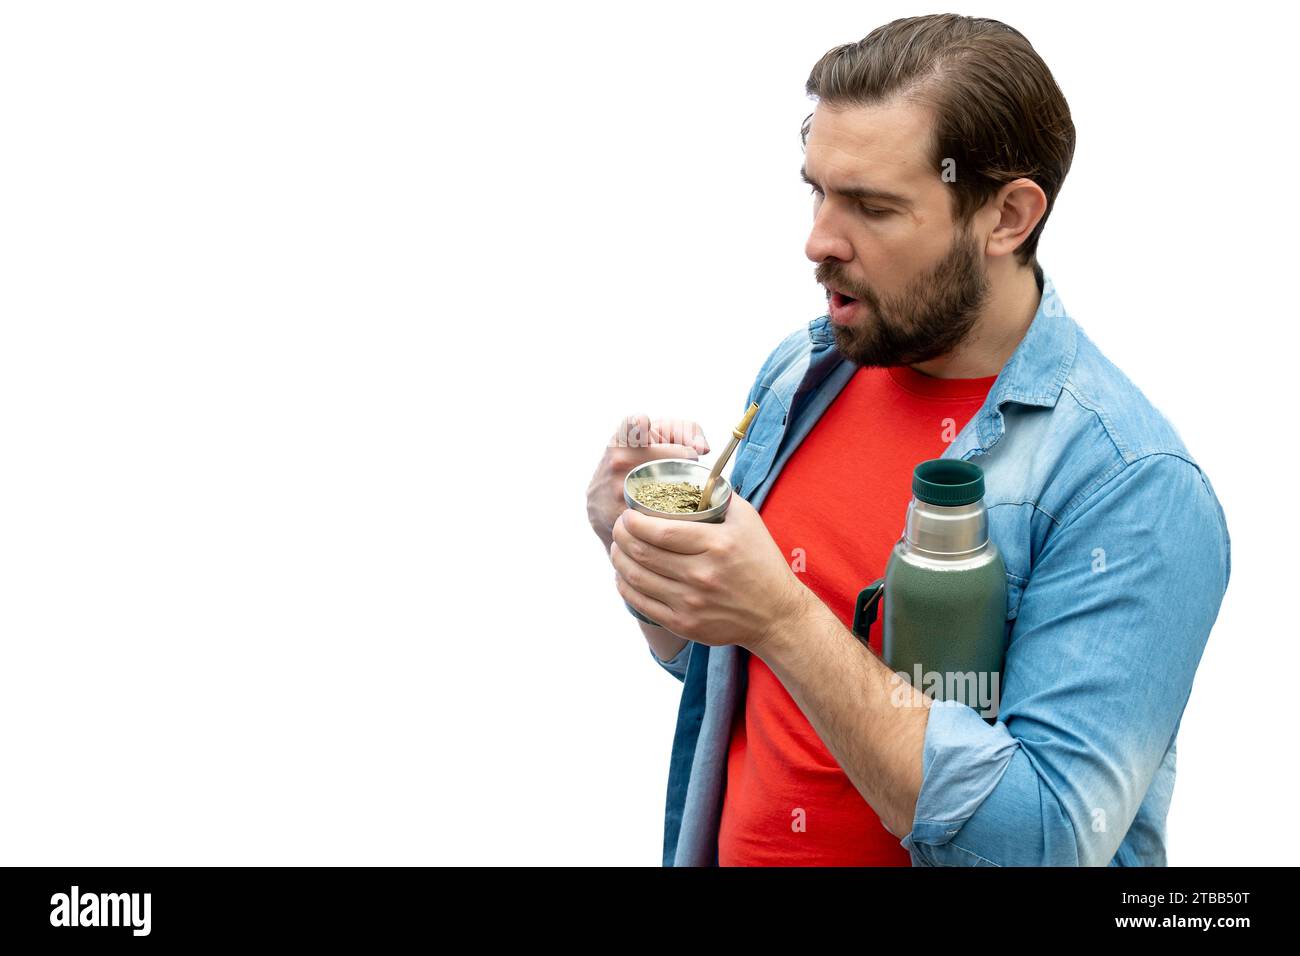 Latin man drinking mate with thermos and mate in hand. Stock Photo